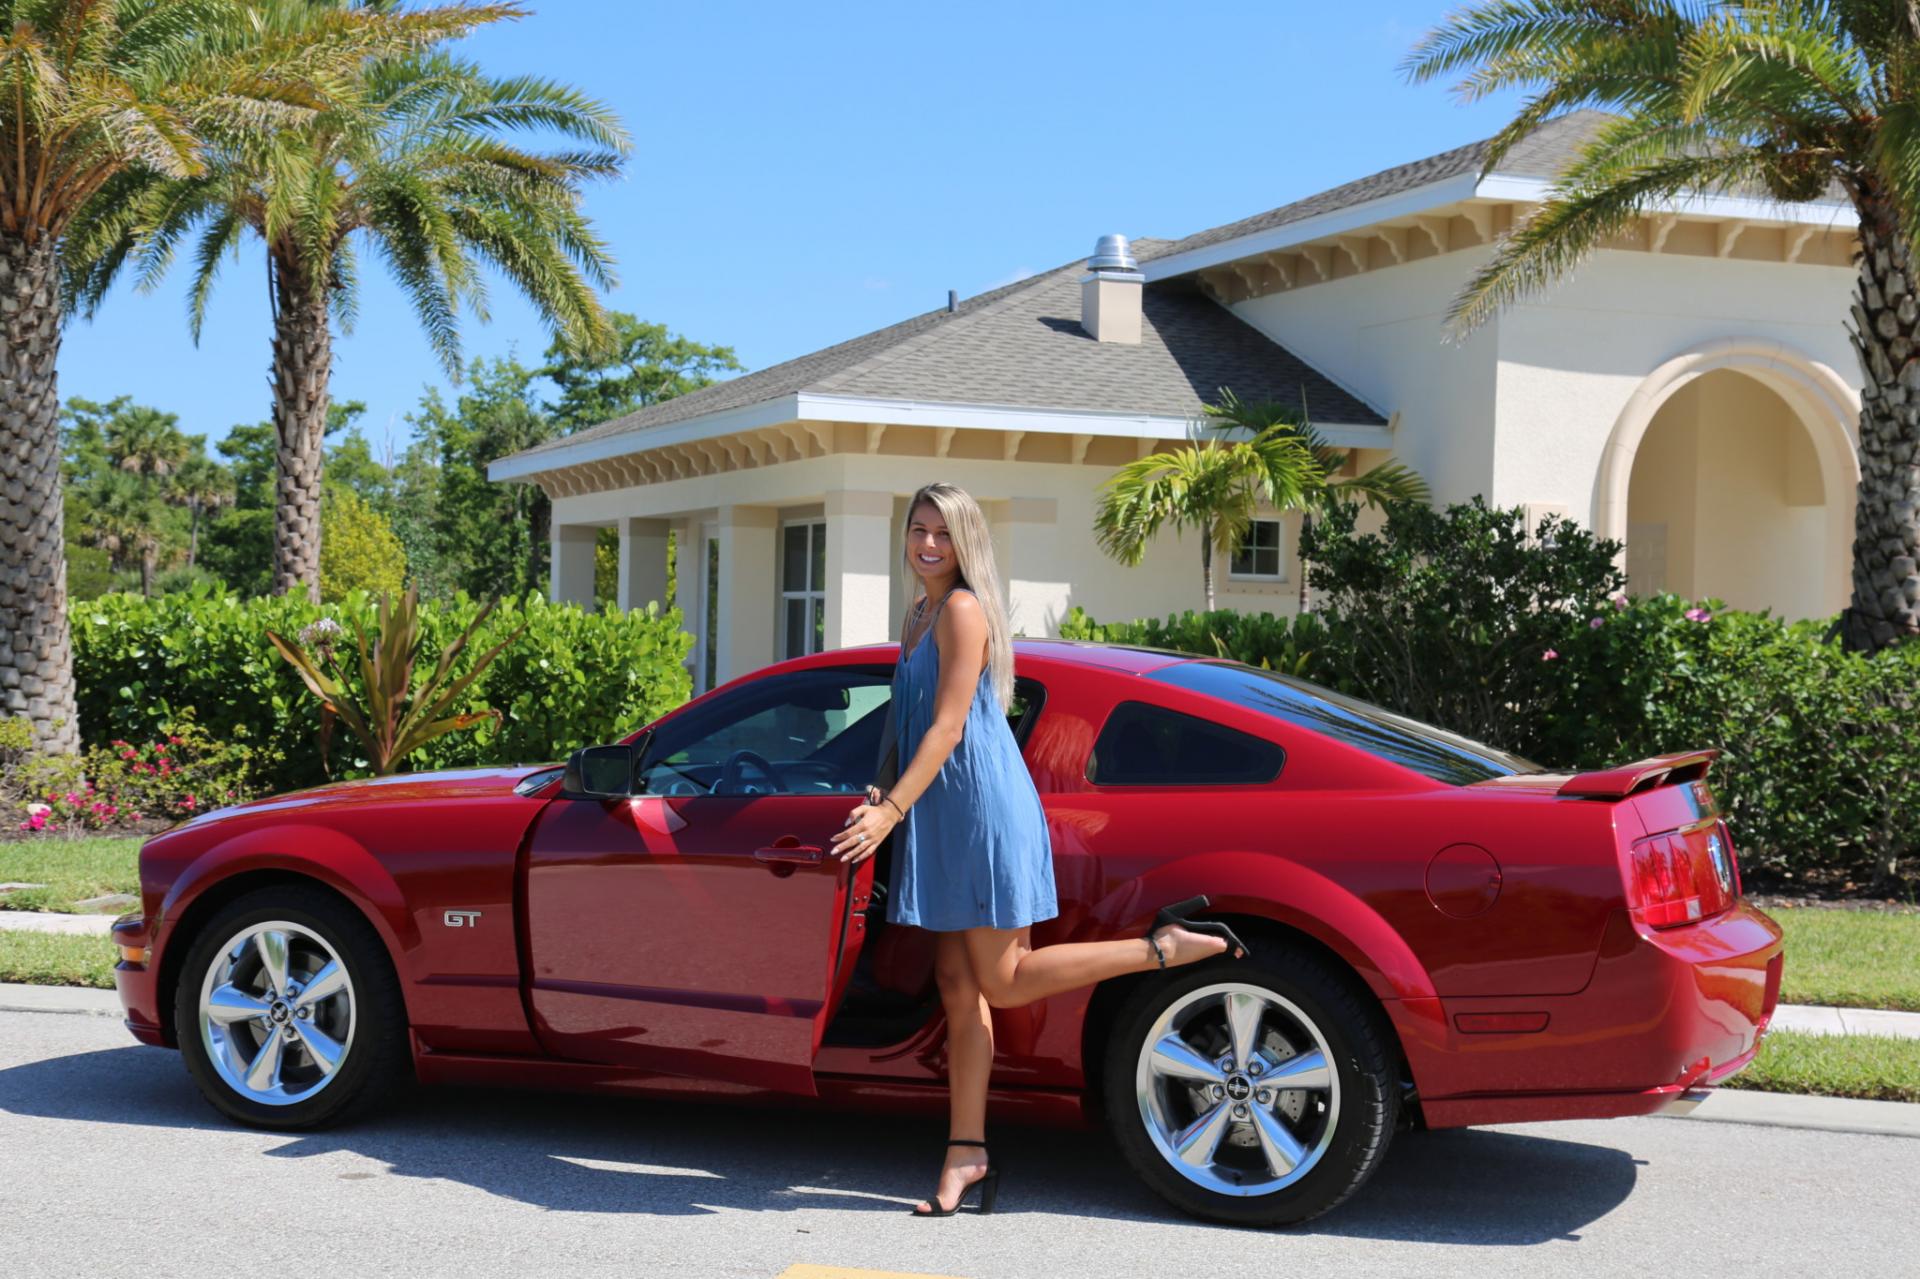 Used 2008 Ford Mustang for sale Sold at Muscle Cars for Sale Inc. in Fort Myers FL 33912 3